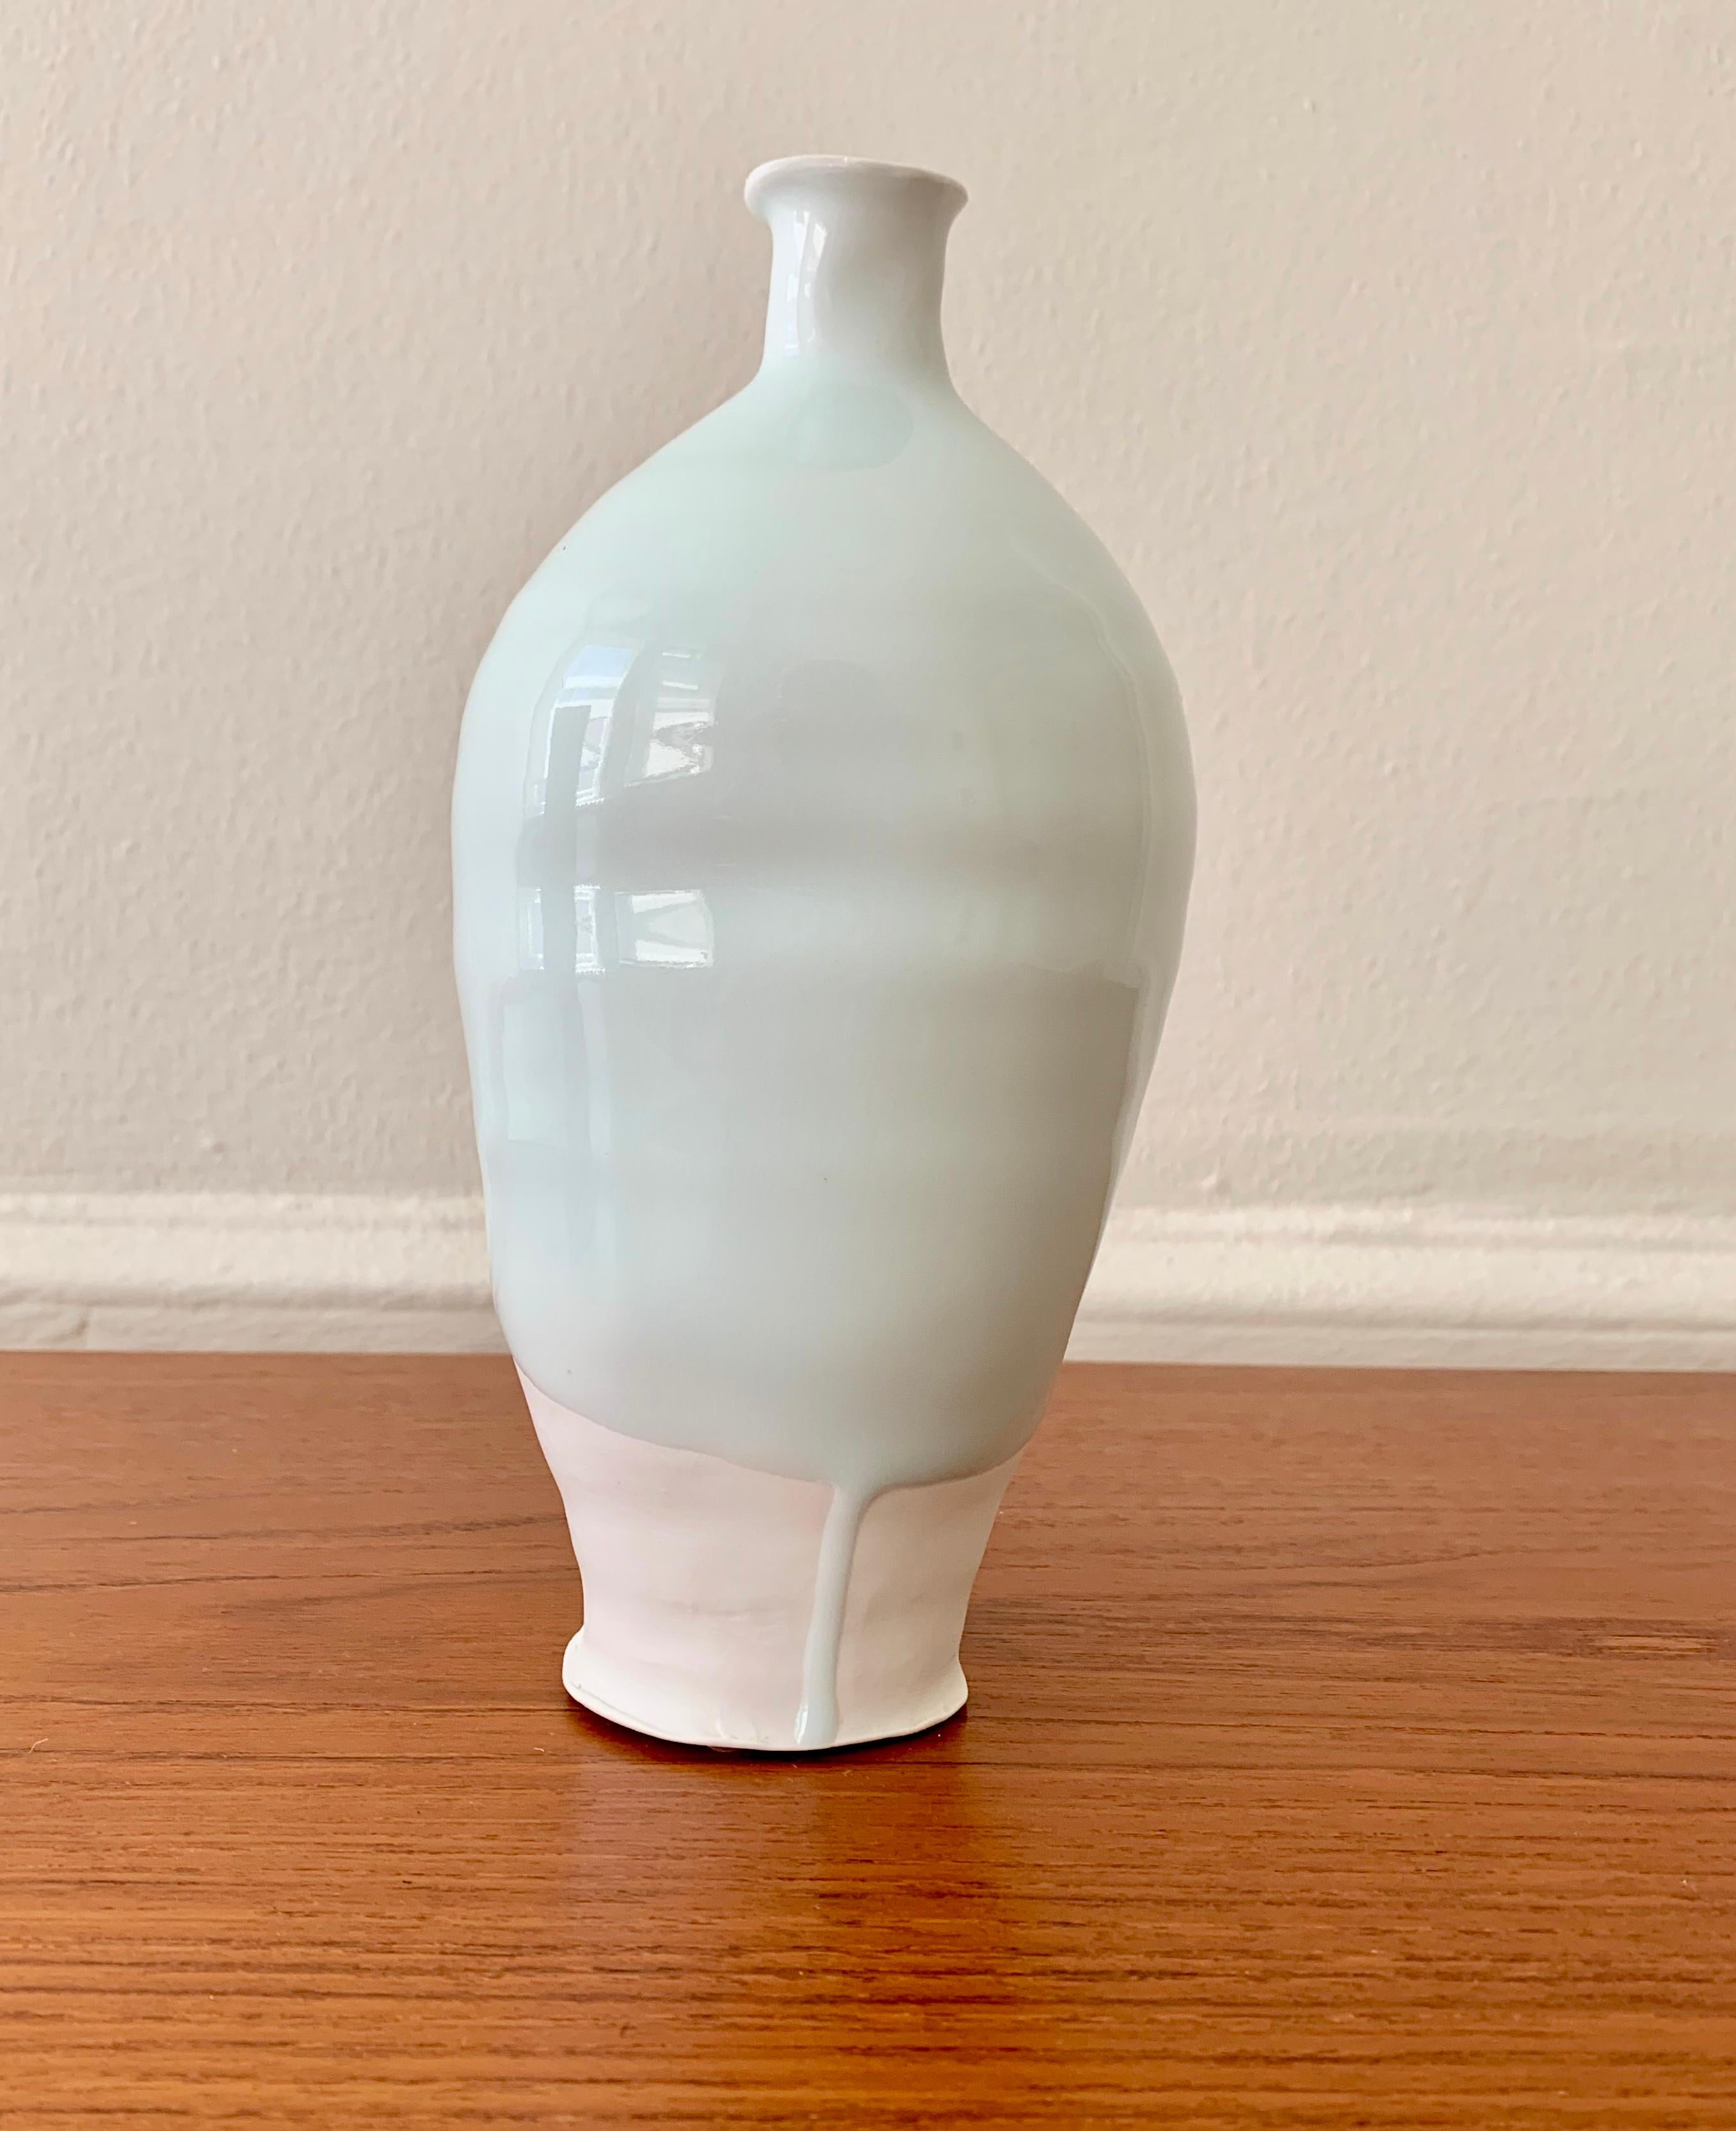 Pale blue celadon glazed porcelain vase by Kato Tsubusa (b. 1962)

Incised with maker's mark, together with a signed wooden box,

Japan, late 20th century.